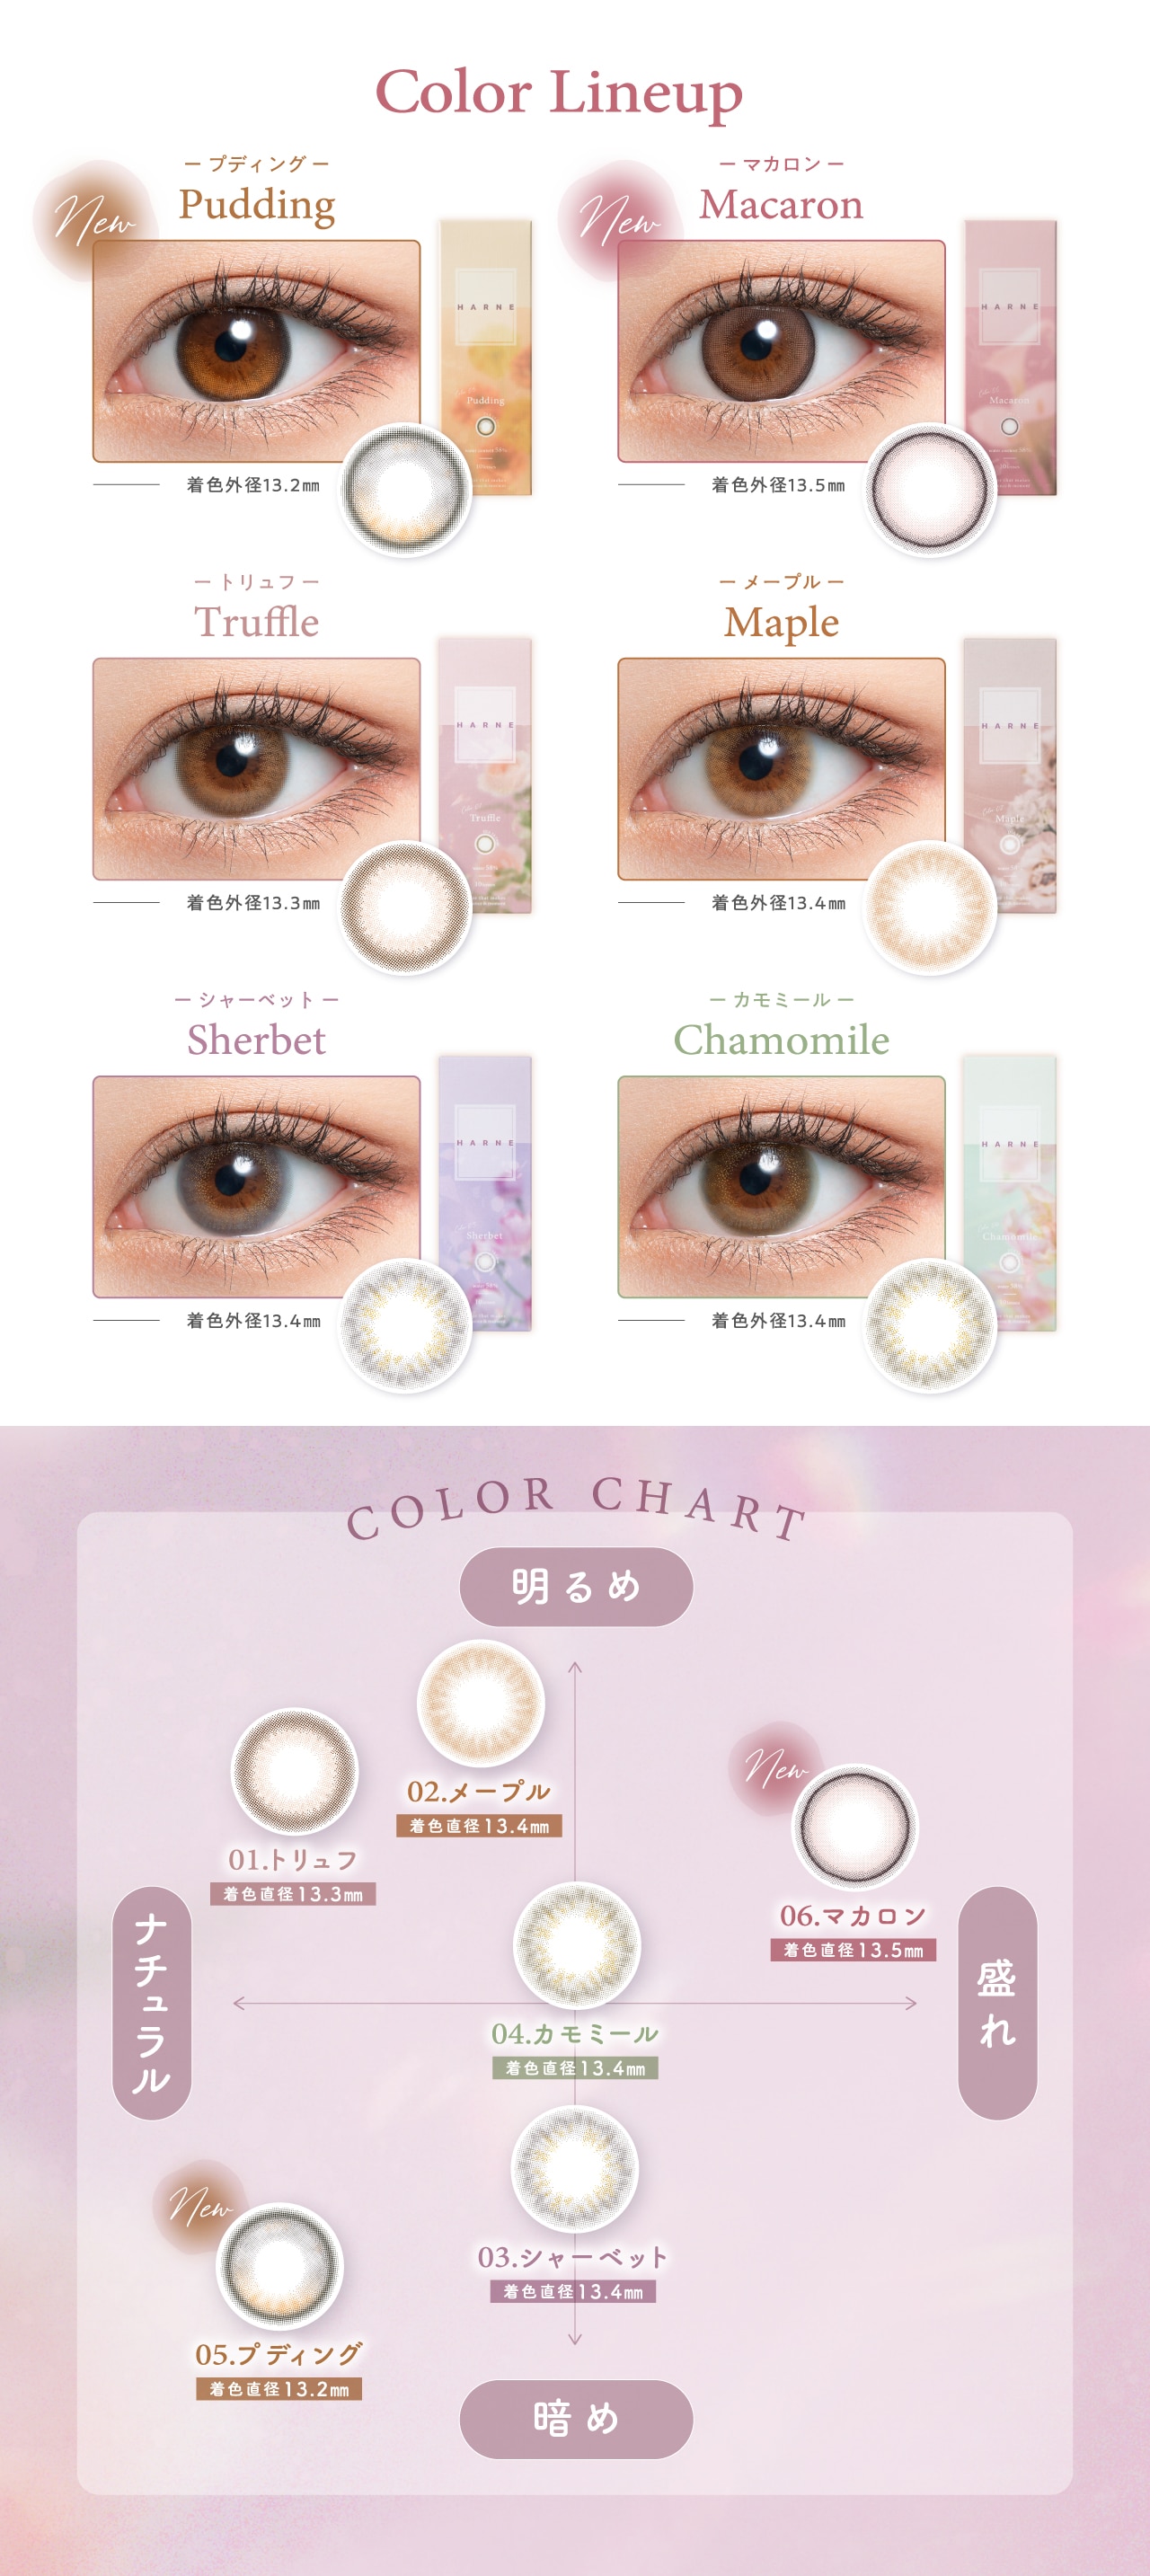 HARNE 1day nl f[(C[Wf/vf[XFĂ񂿂) Color Lineup COLOR CHART